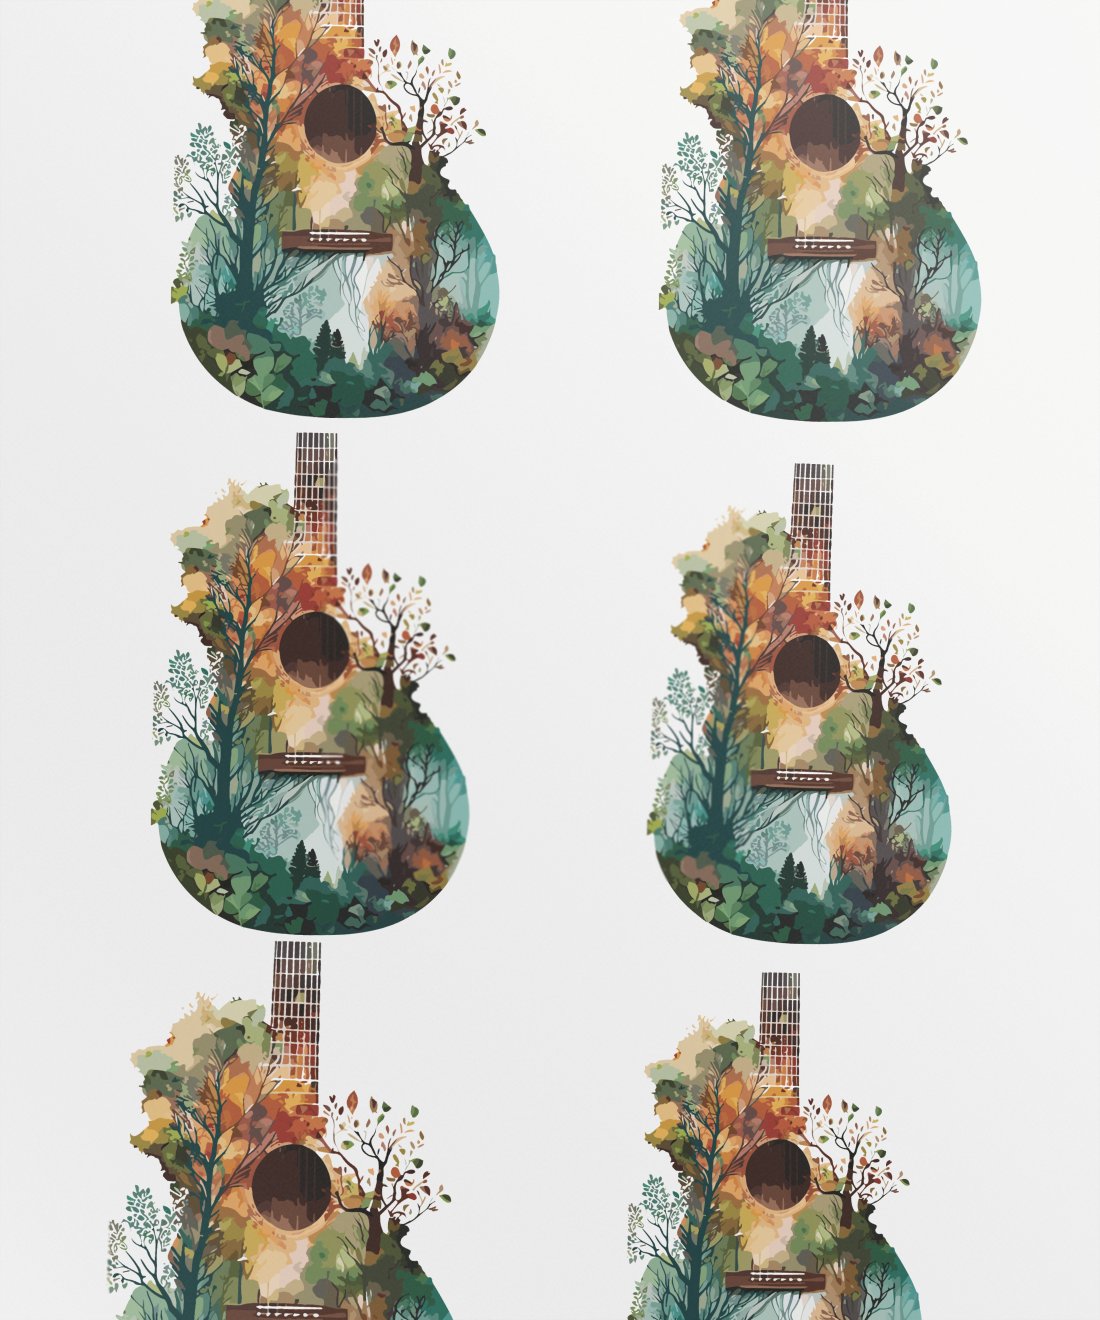 natures-melody_-guitar-and-tree-branch-fusion - Image 1